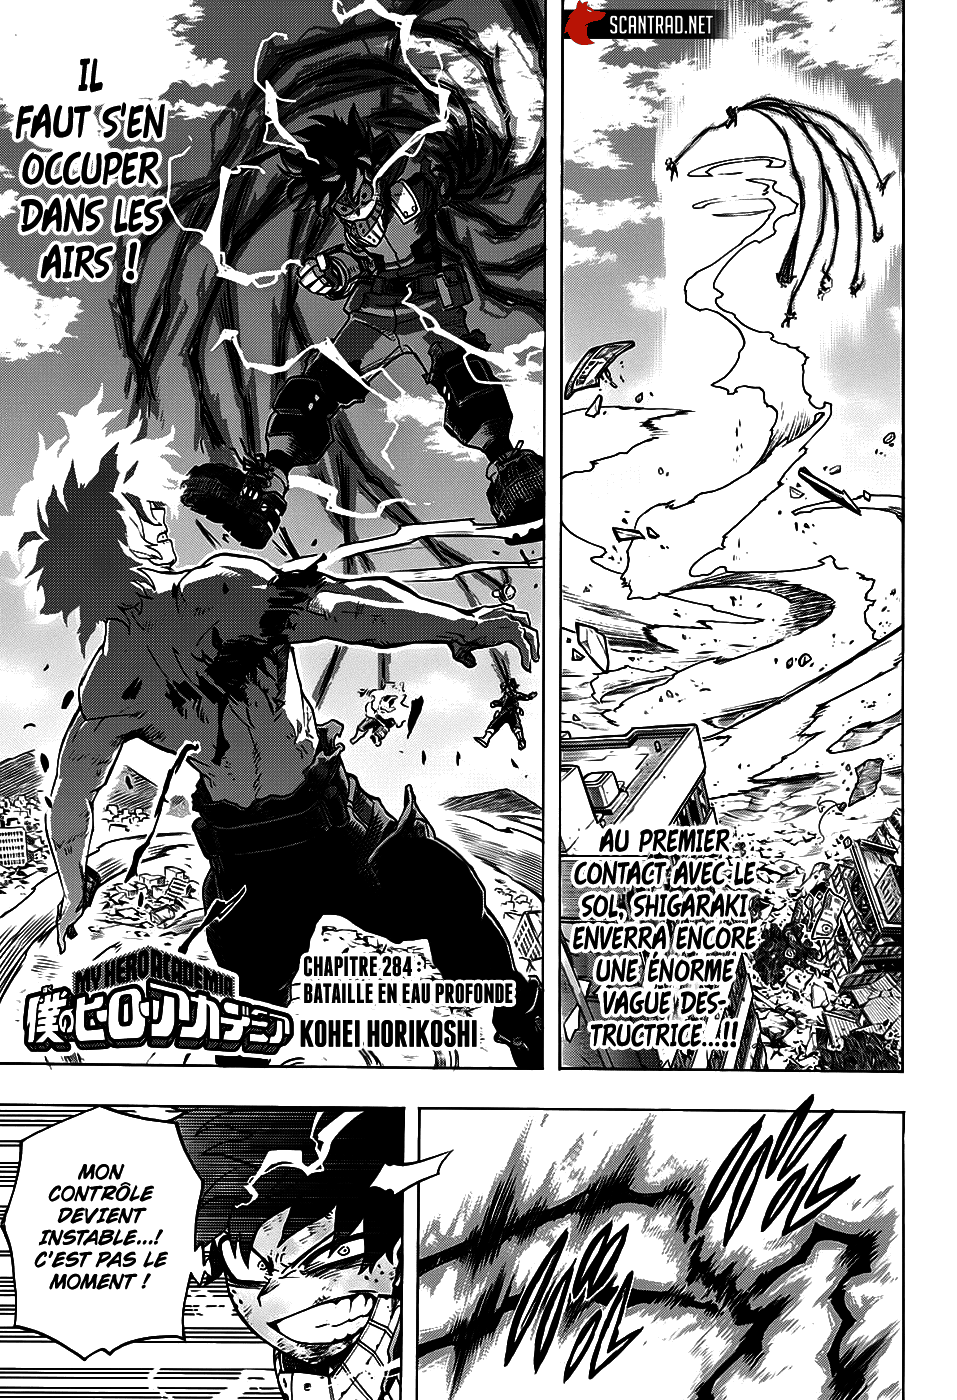 My Hero Academia: Chapter chapitre-284 - Page 1